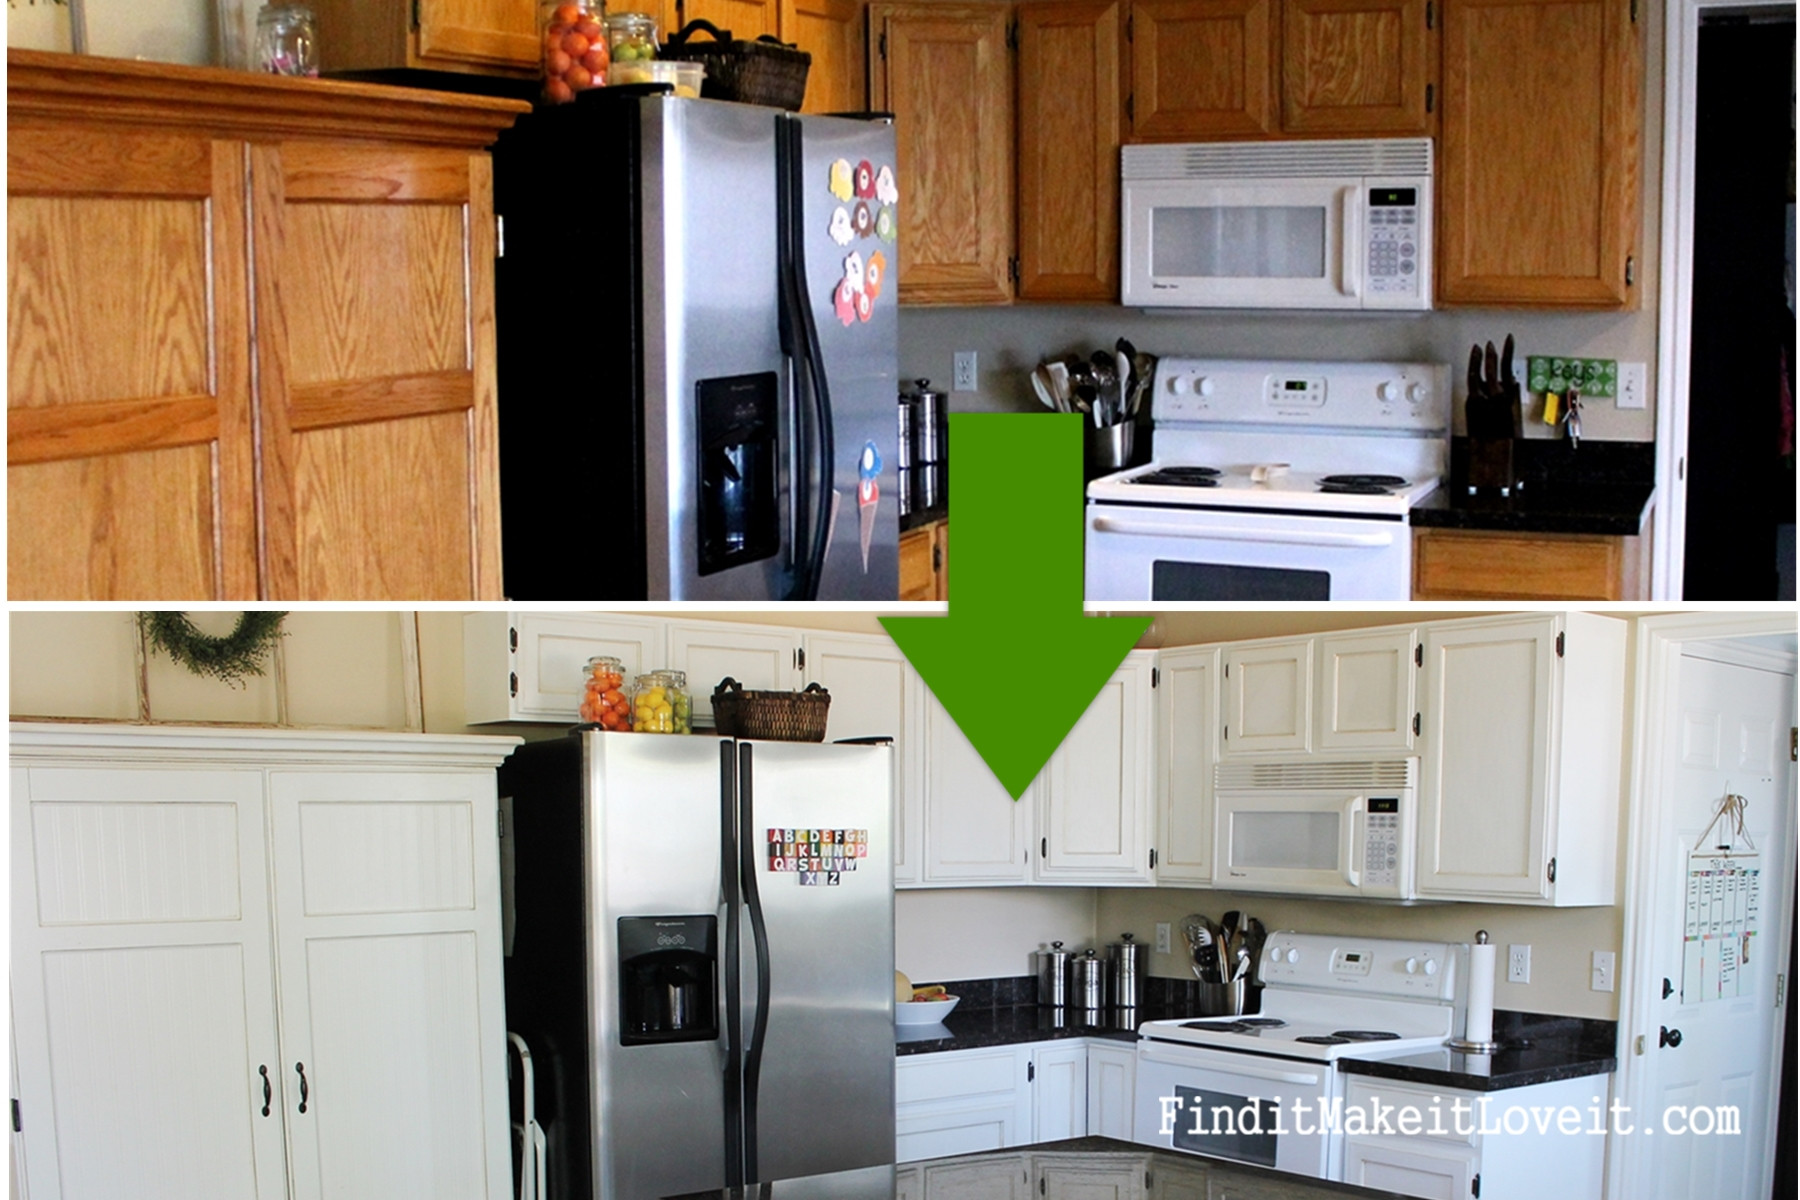 Best ideas about DIY Paint Cabinets
. Save or Pin $150 Kitchen Cabinet Makeover Find it Make it Love it Now.